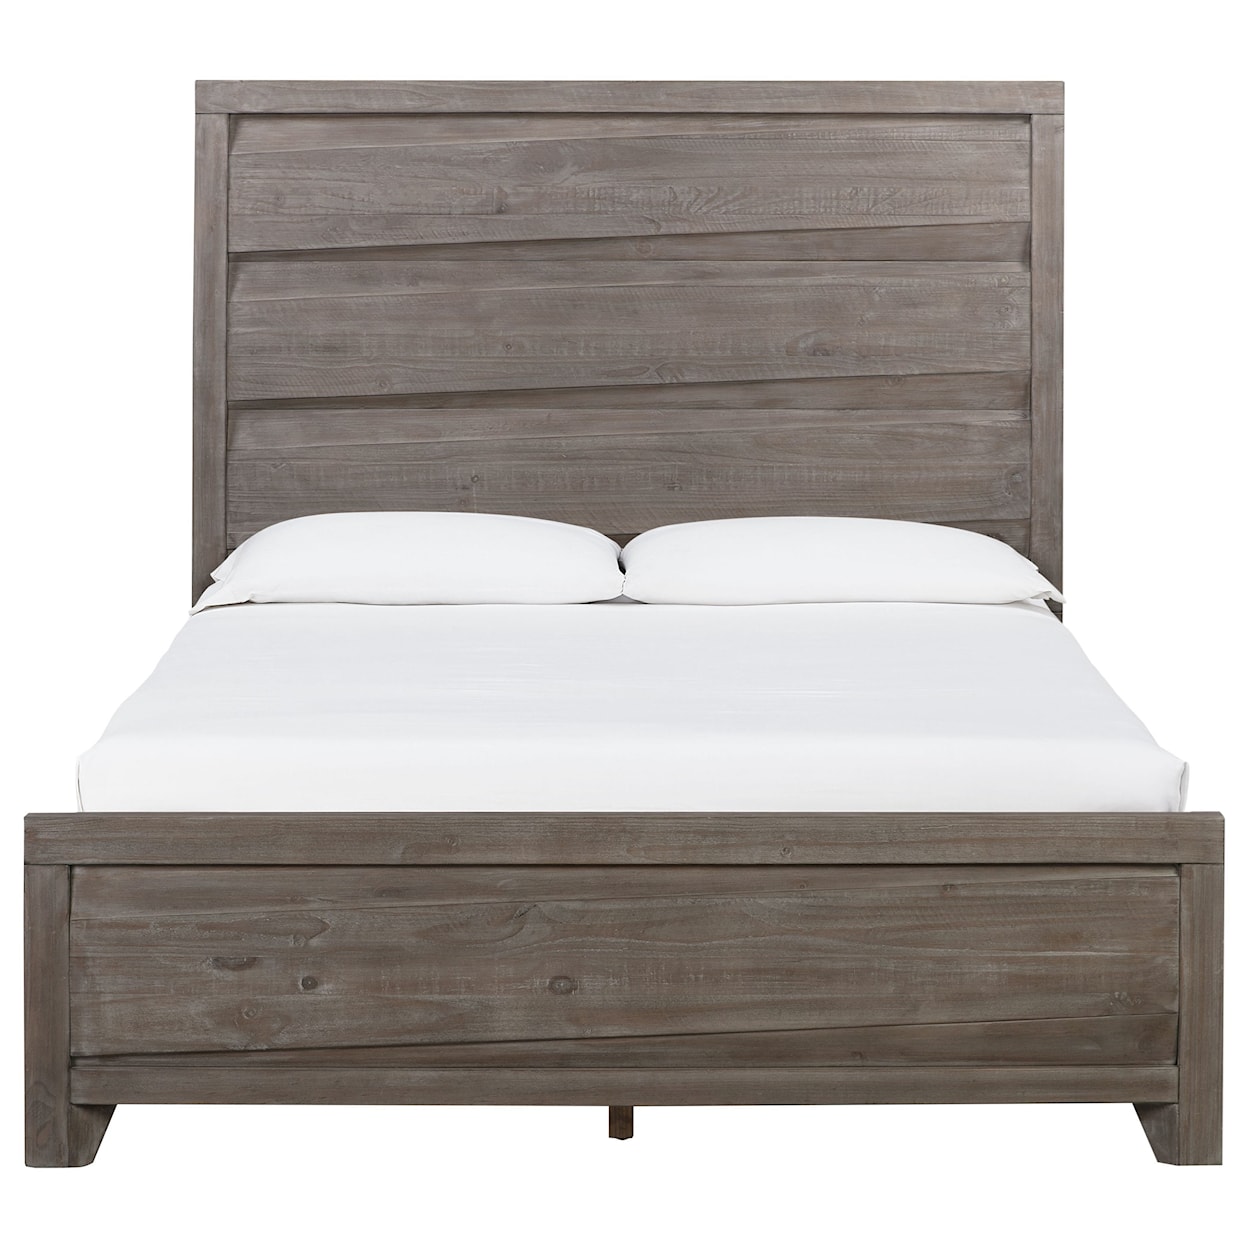 Modus International Hearst Solid Wood King Panel Bed